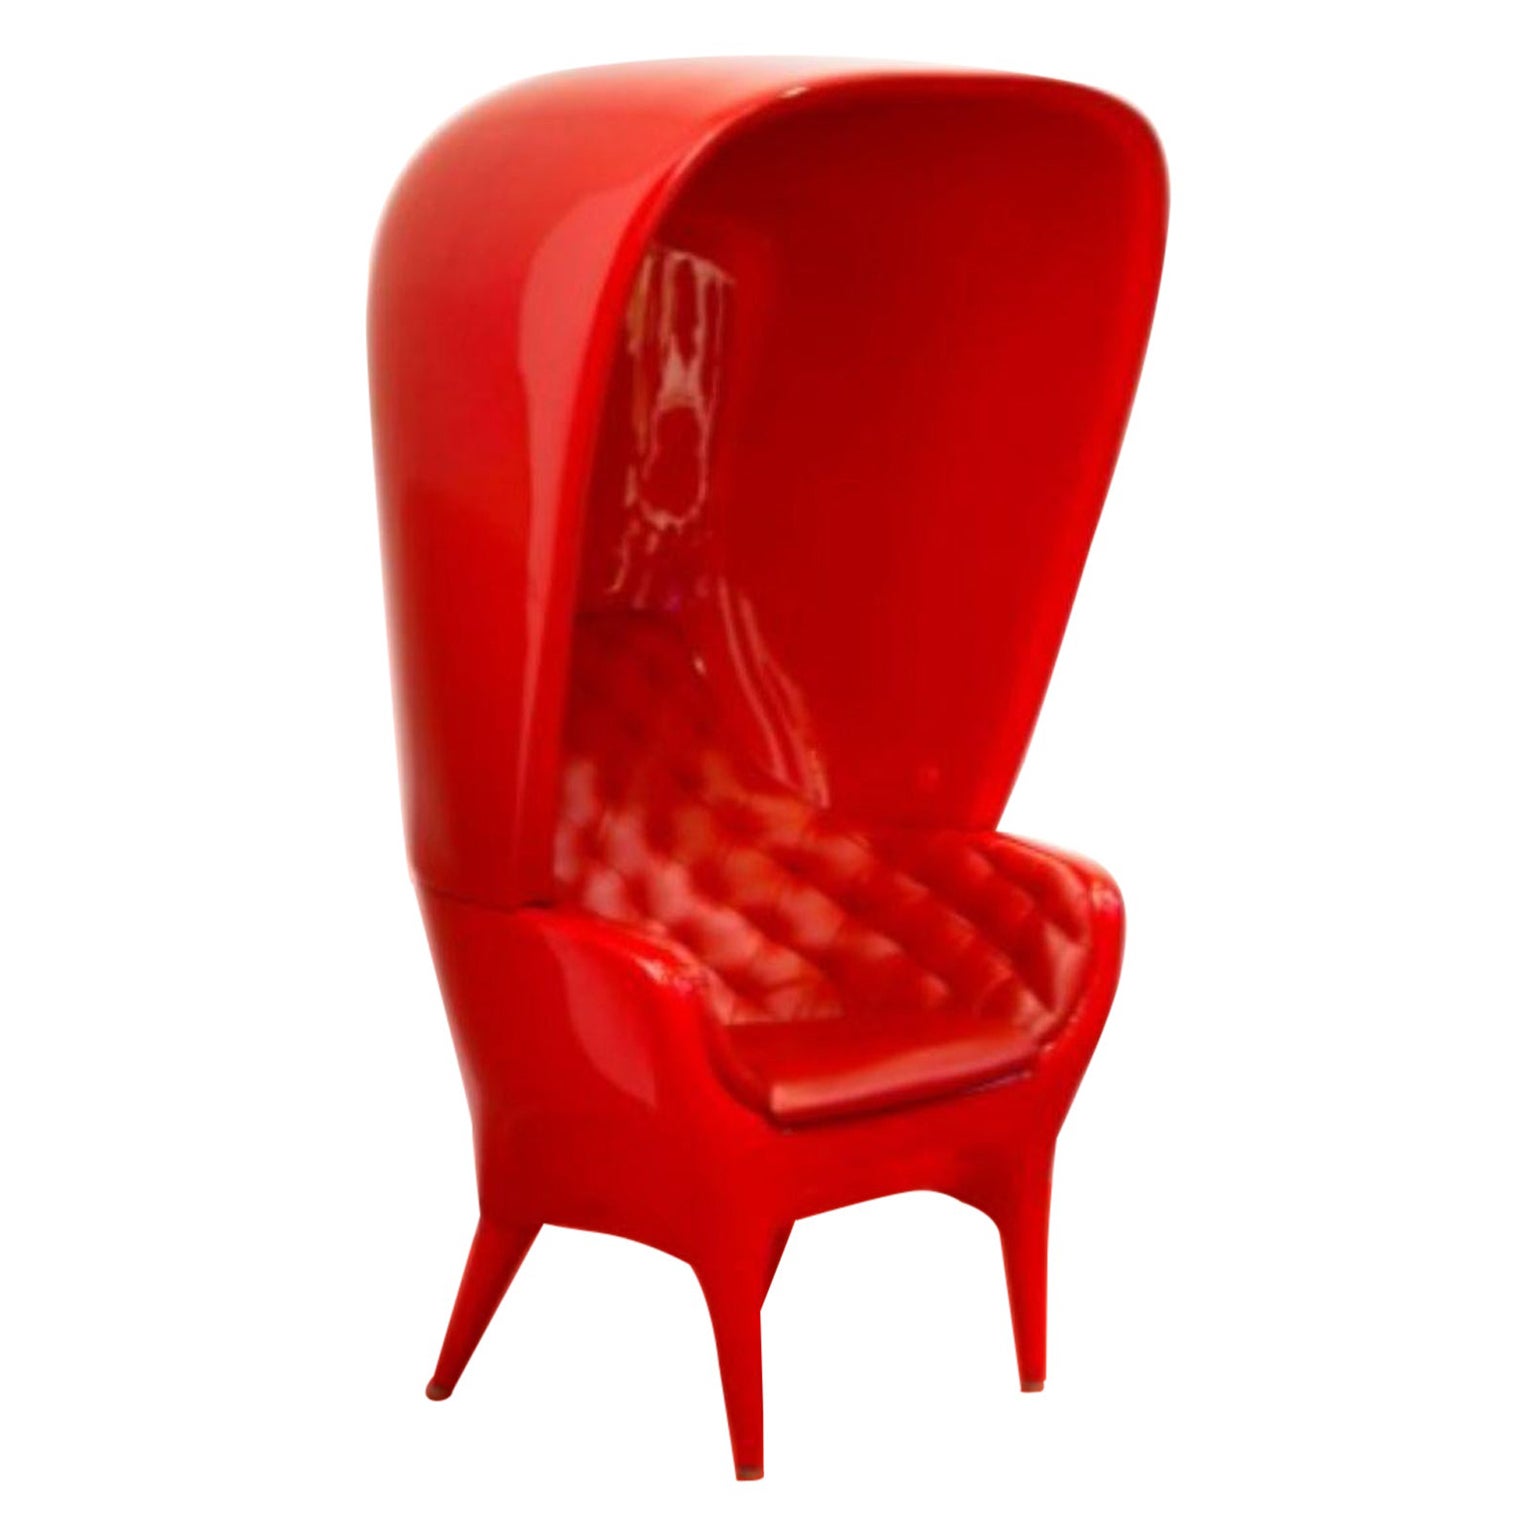 Showtime Red Armchair with Cover by Jaime Hayon